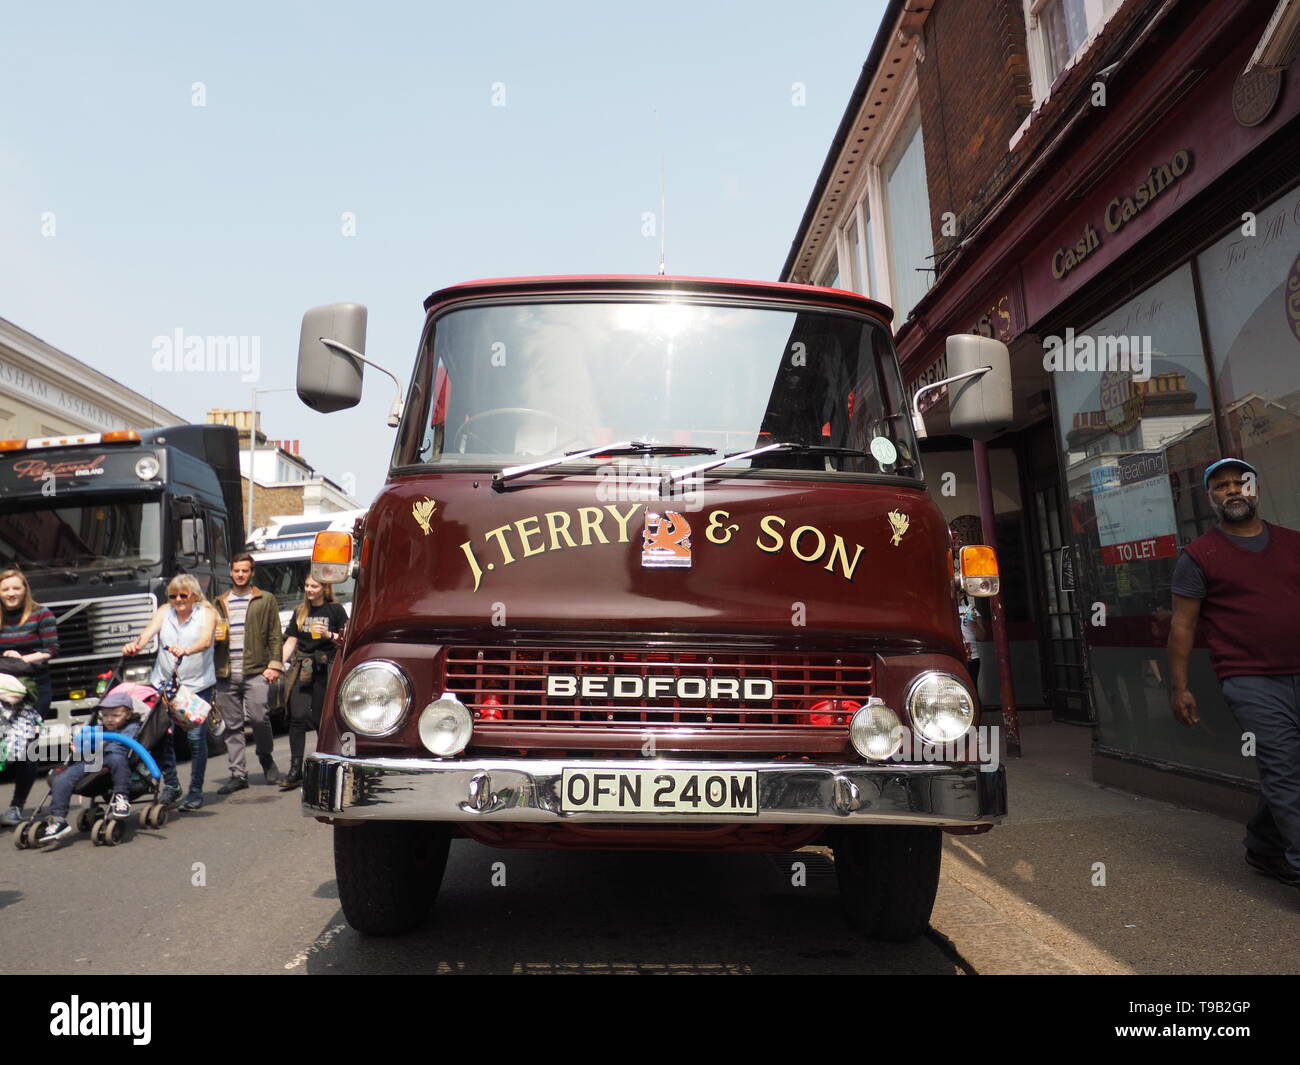 Faversham, Kent, UK. 18th May, 2019. 25th Faversham Transport Weekend: the first day of this annual transport festival show casing a range of vintage buses and commercial transport. Pictured: a vintage J. Terry & Son Bedford truck. Credit: James Bell/Alamy Live News Stock Photo